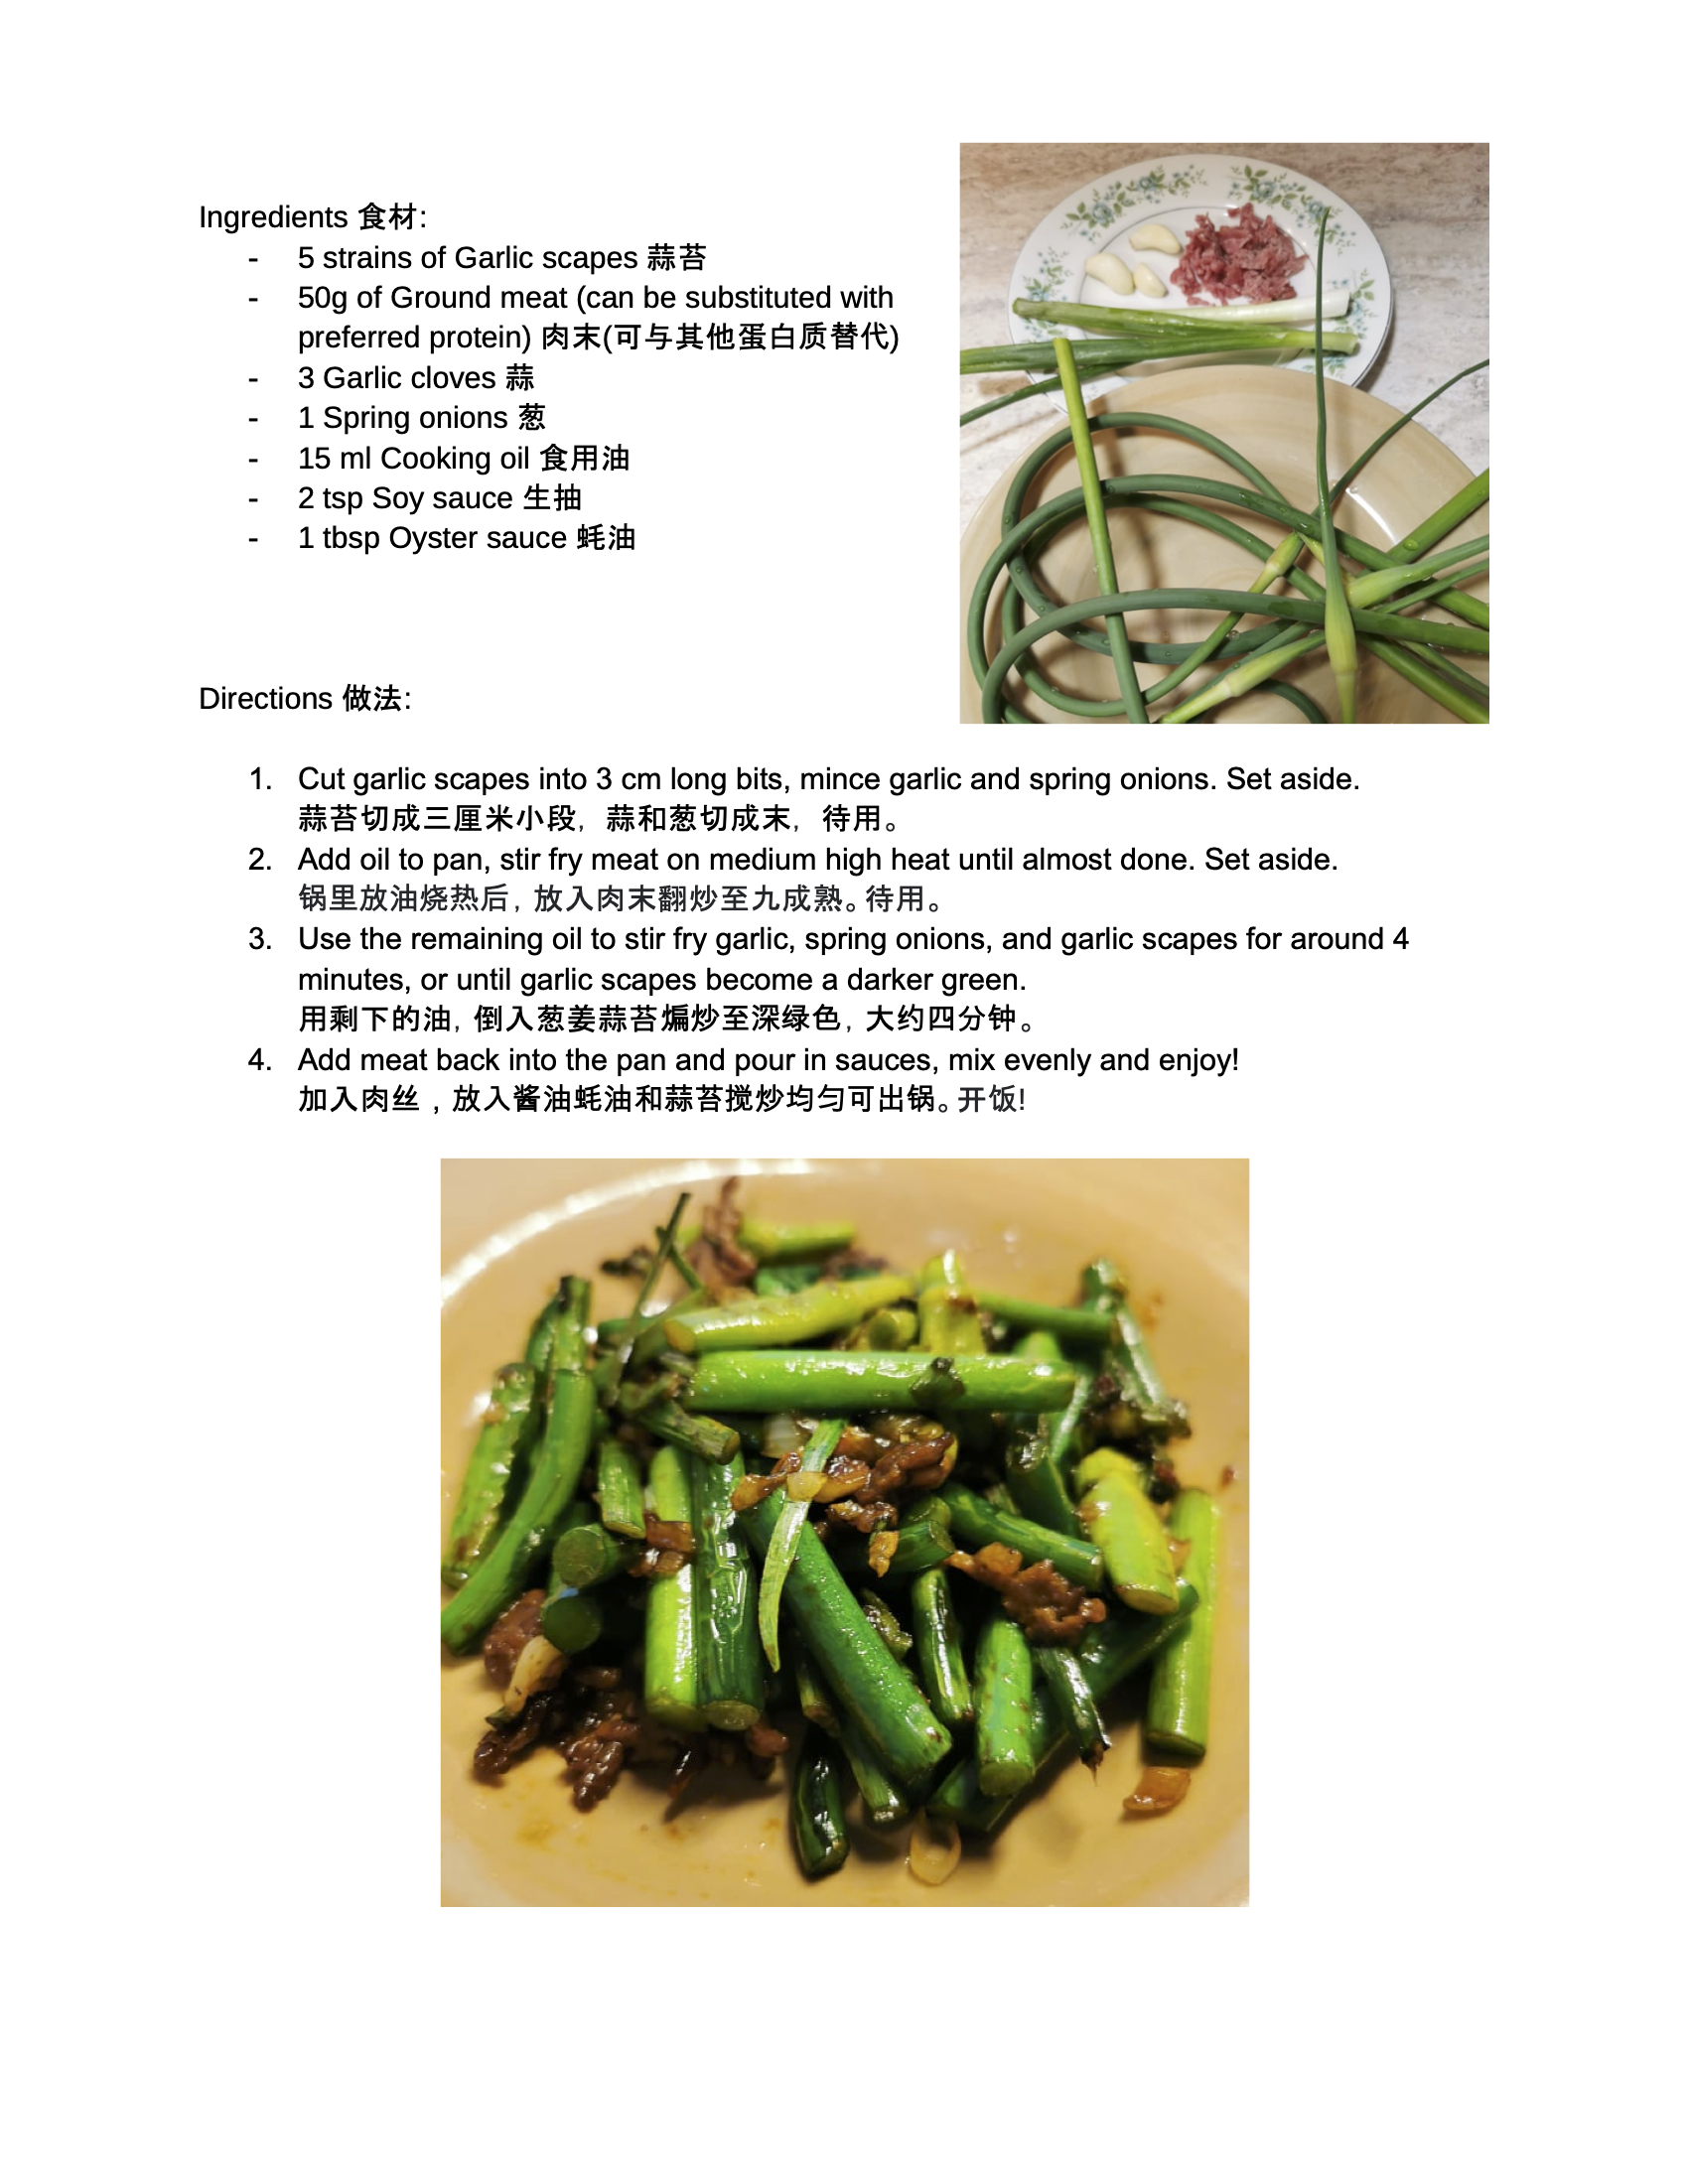 Garlic Scapes Recipe with Measurements copy.png